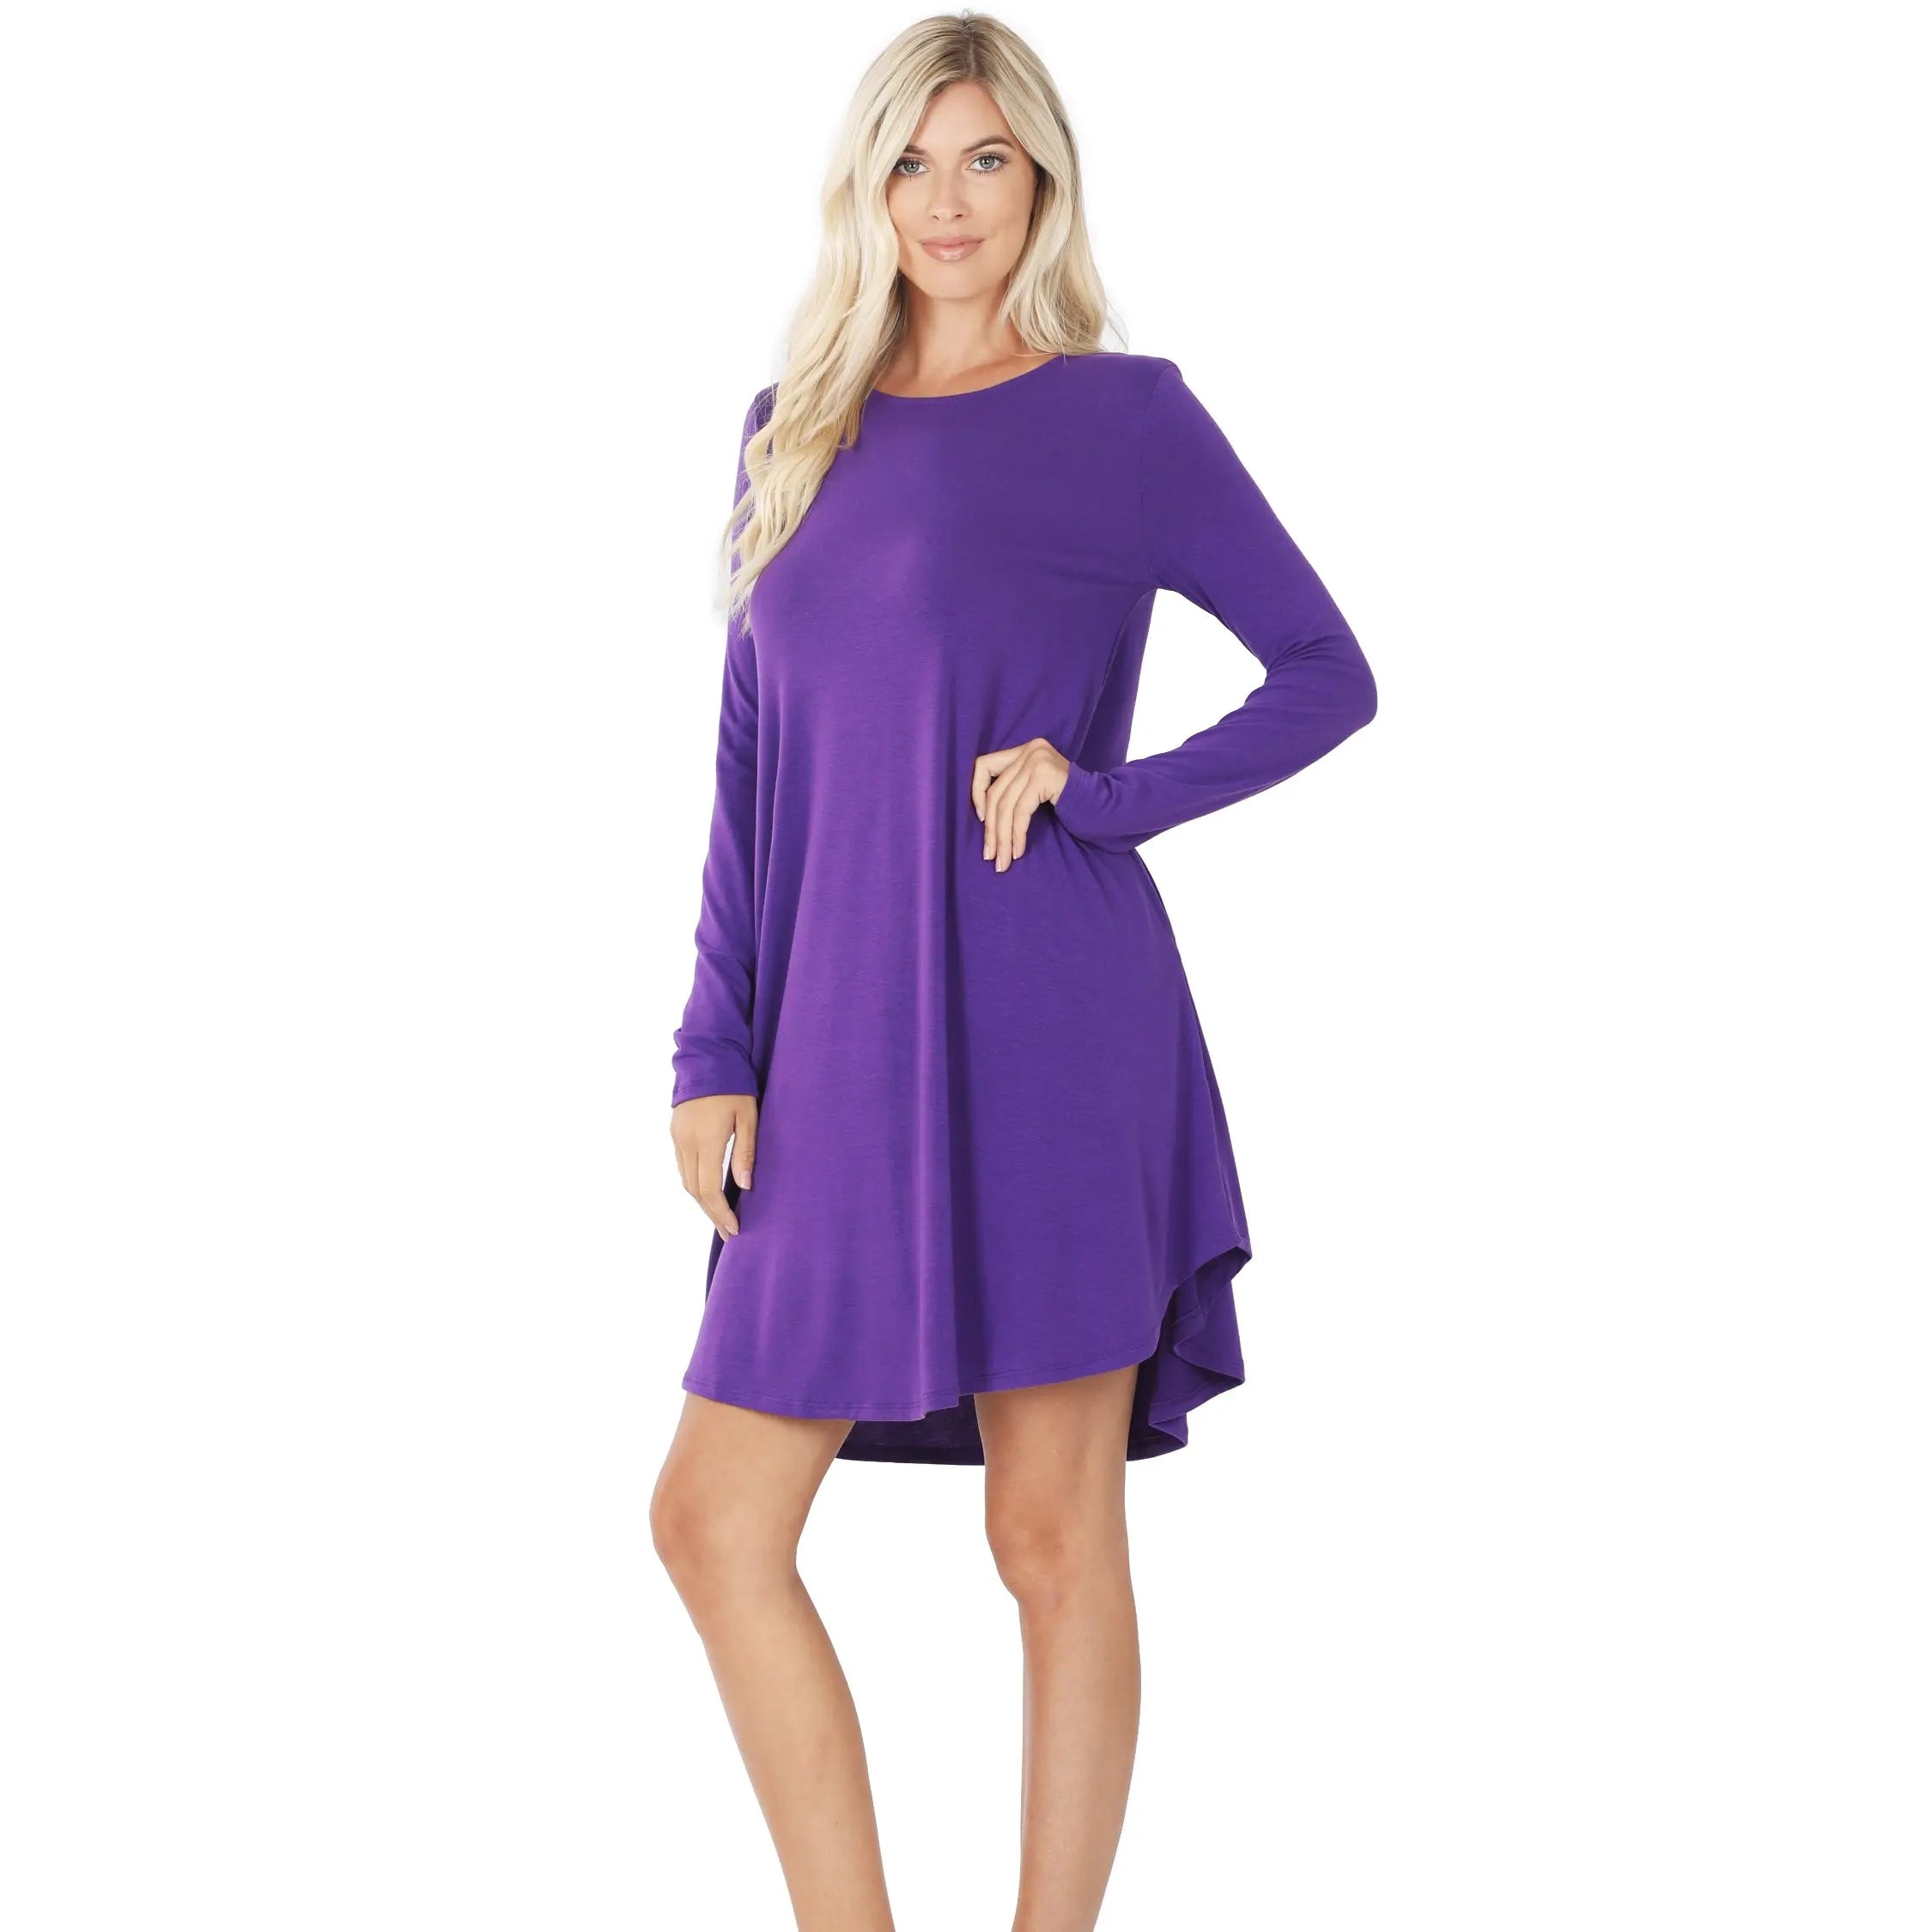 LONG SLEEVE ROUND HEM A-LINE DRESS WITH SIDE POCKETS - Cathy,s new look 